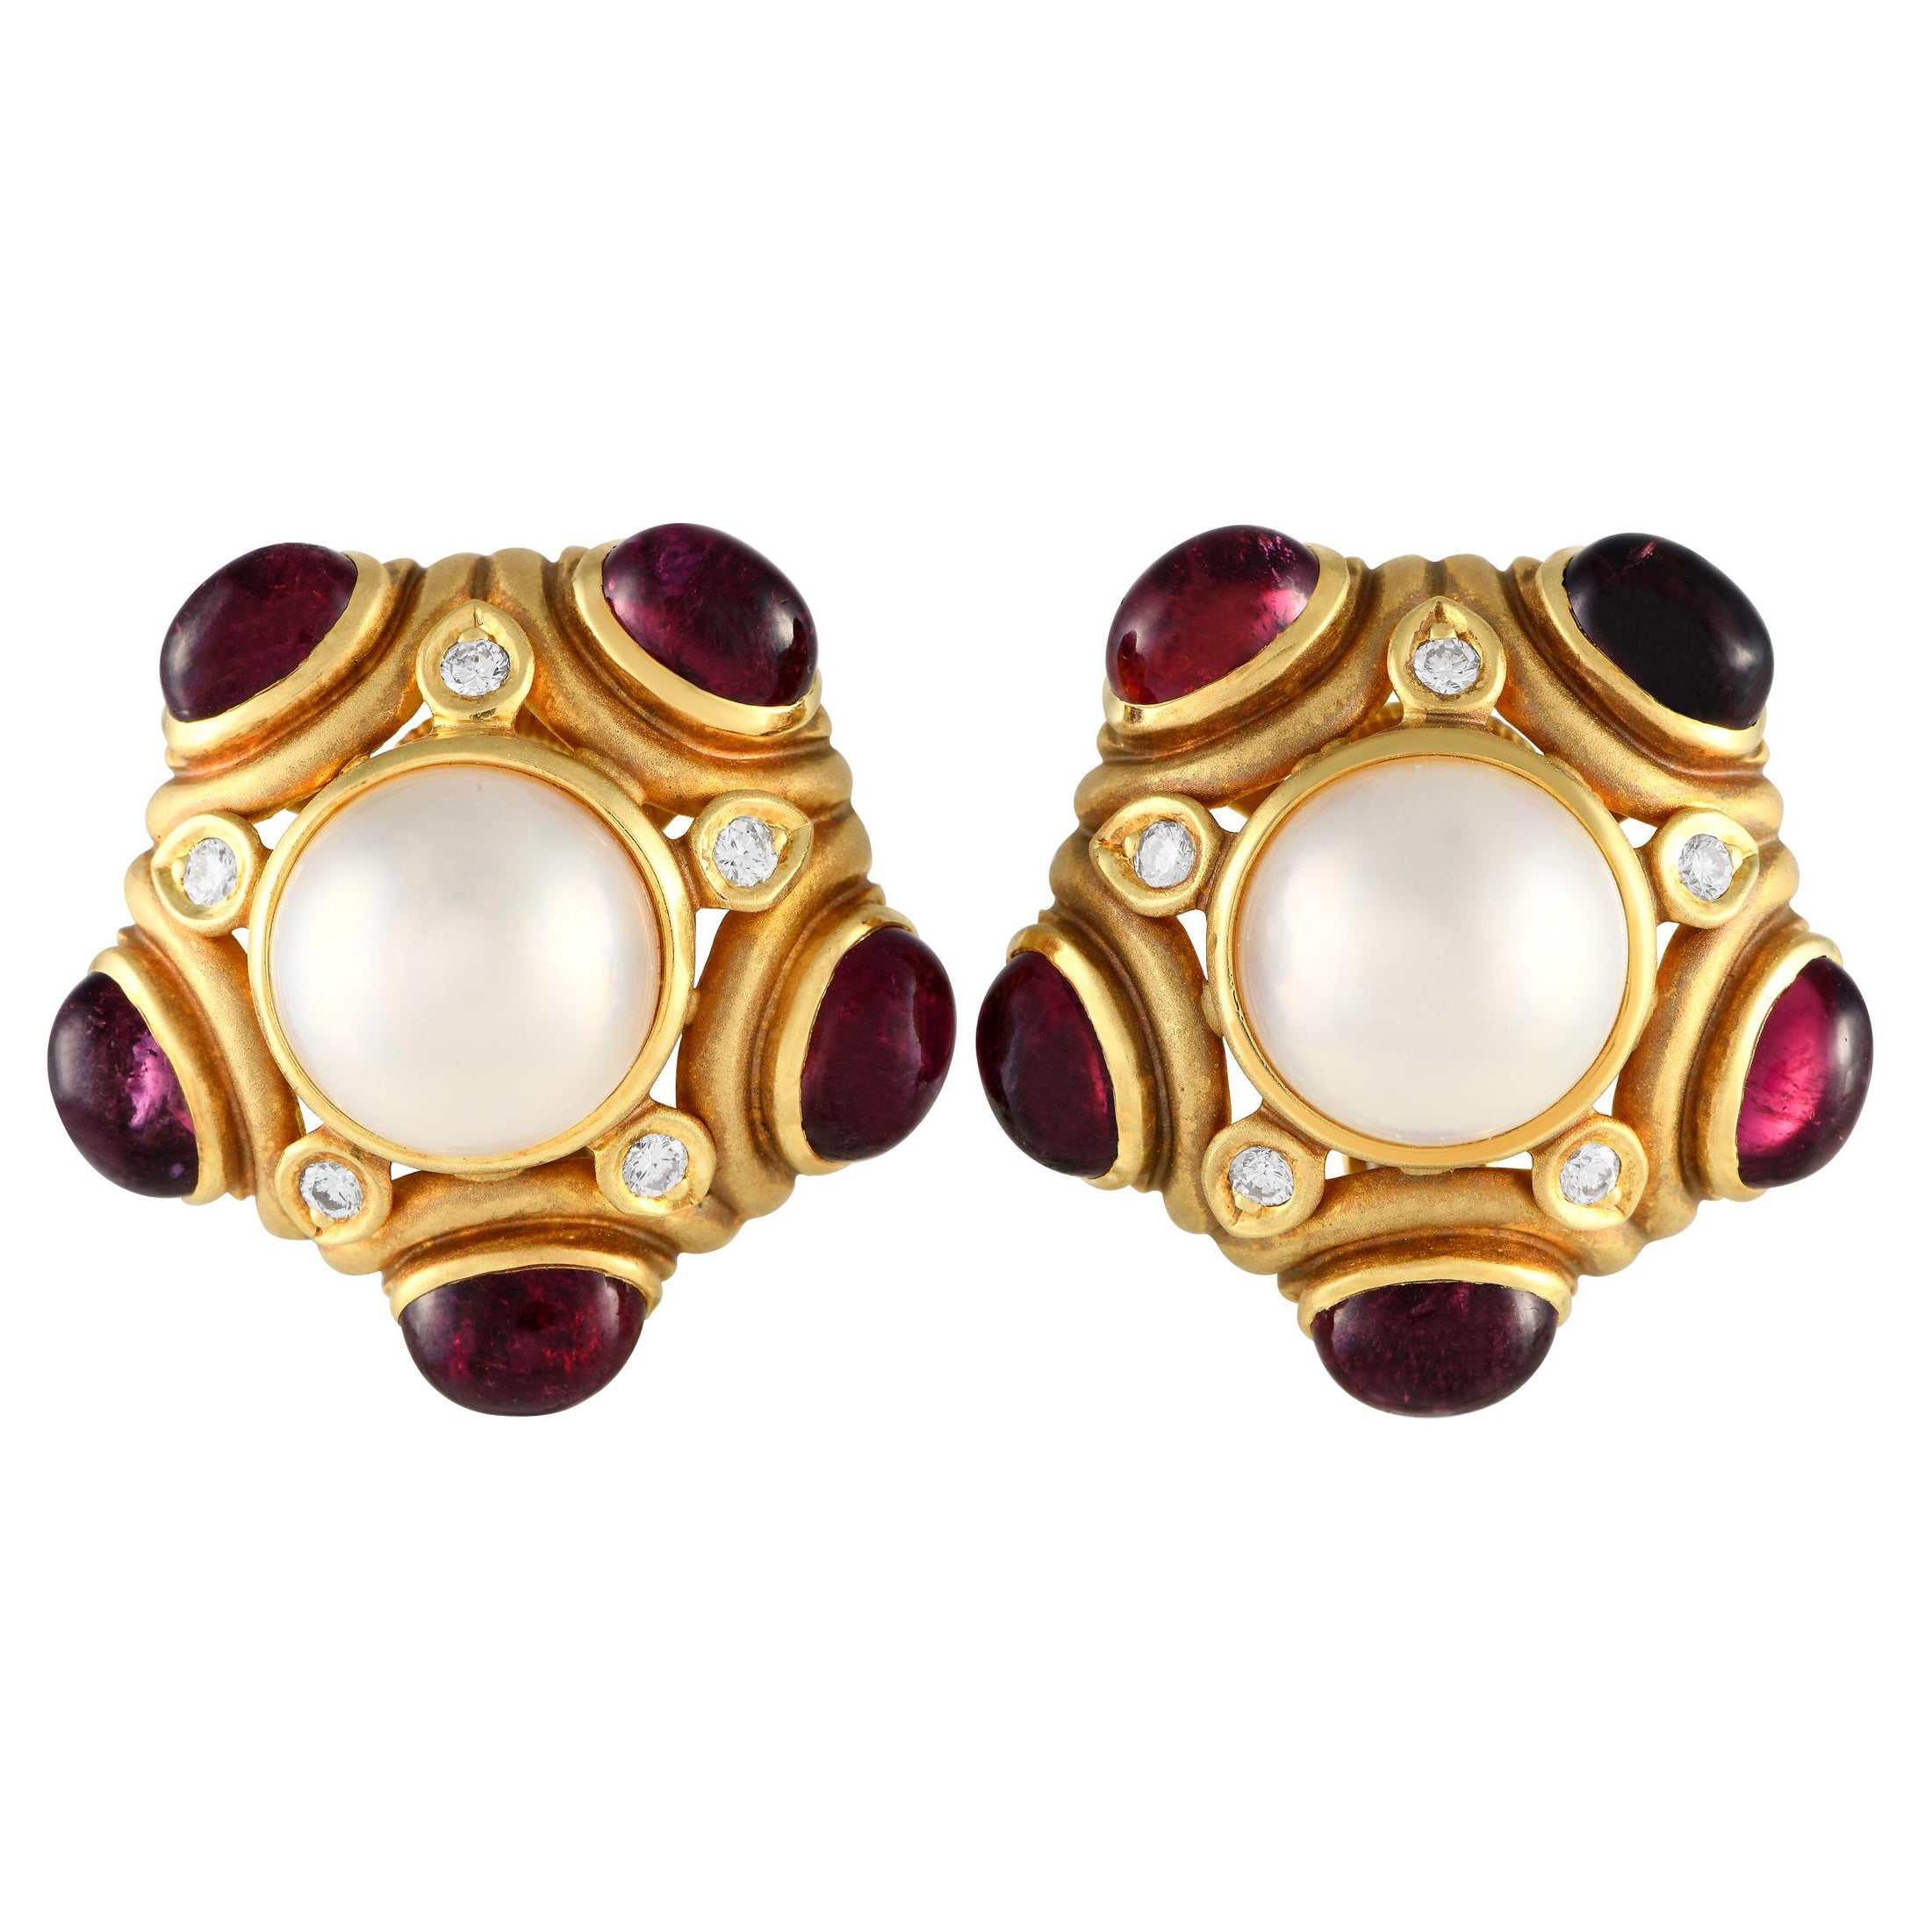 18K Yellow Gold Diamond, Tourmaline, and Pearl Clip On Earrings